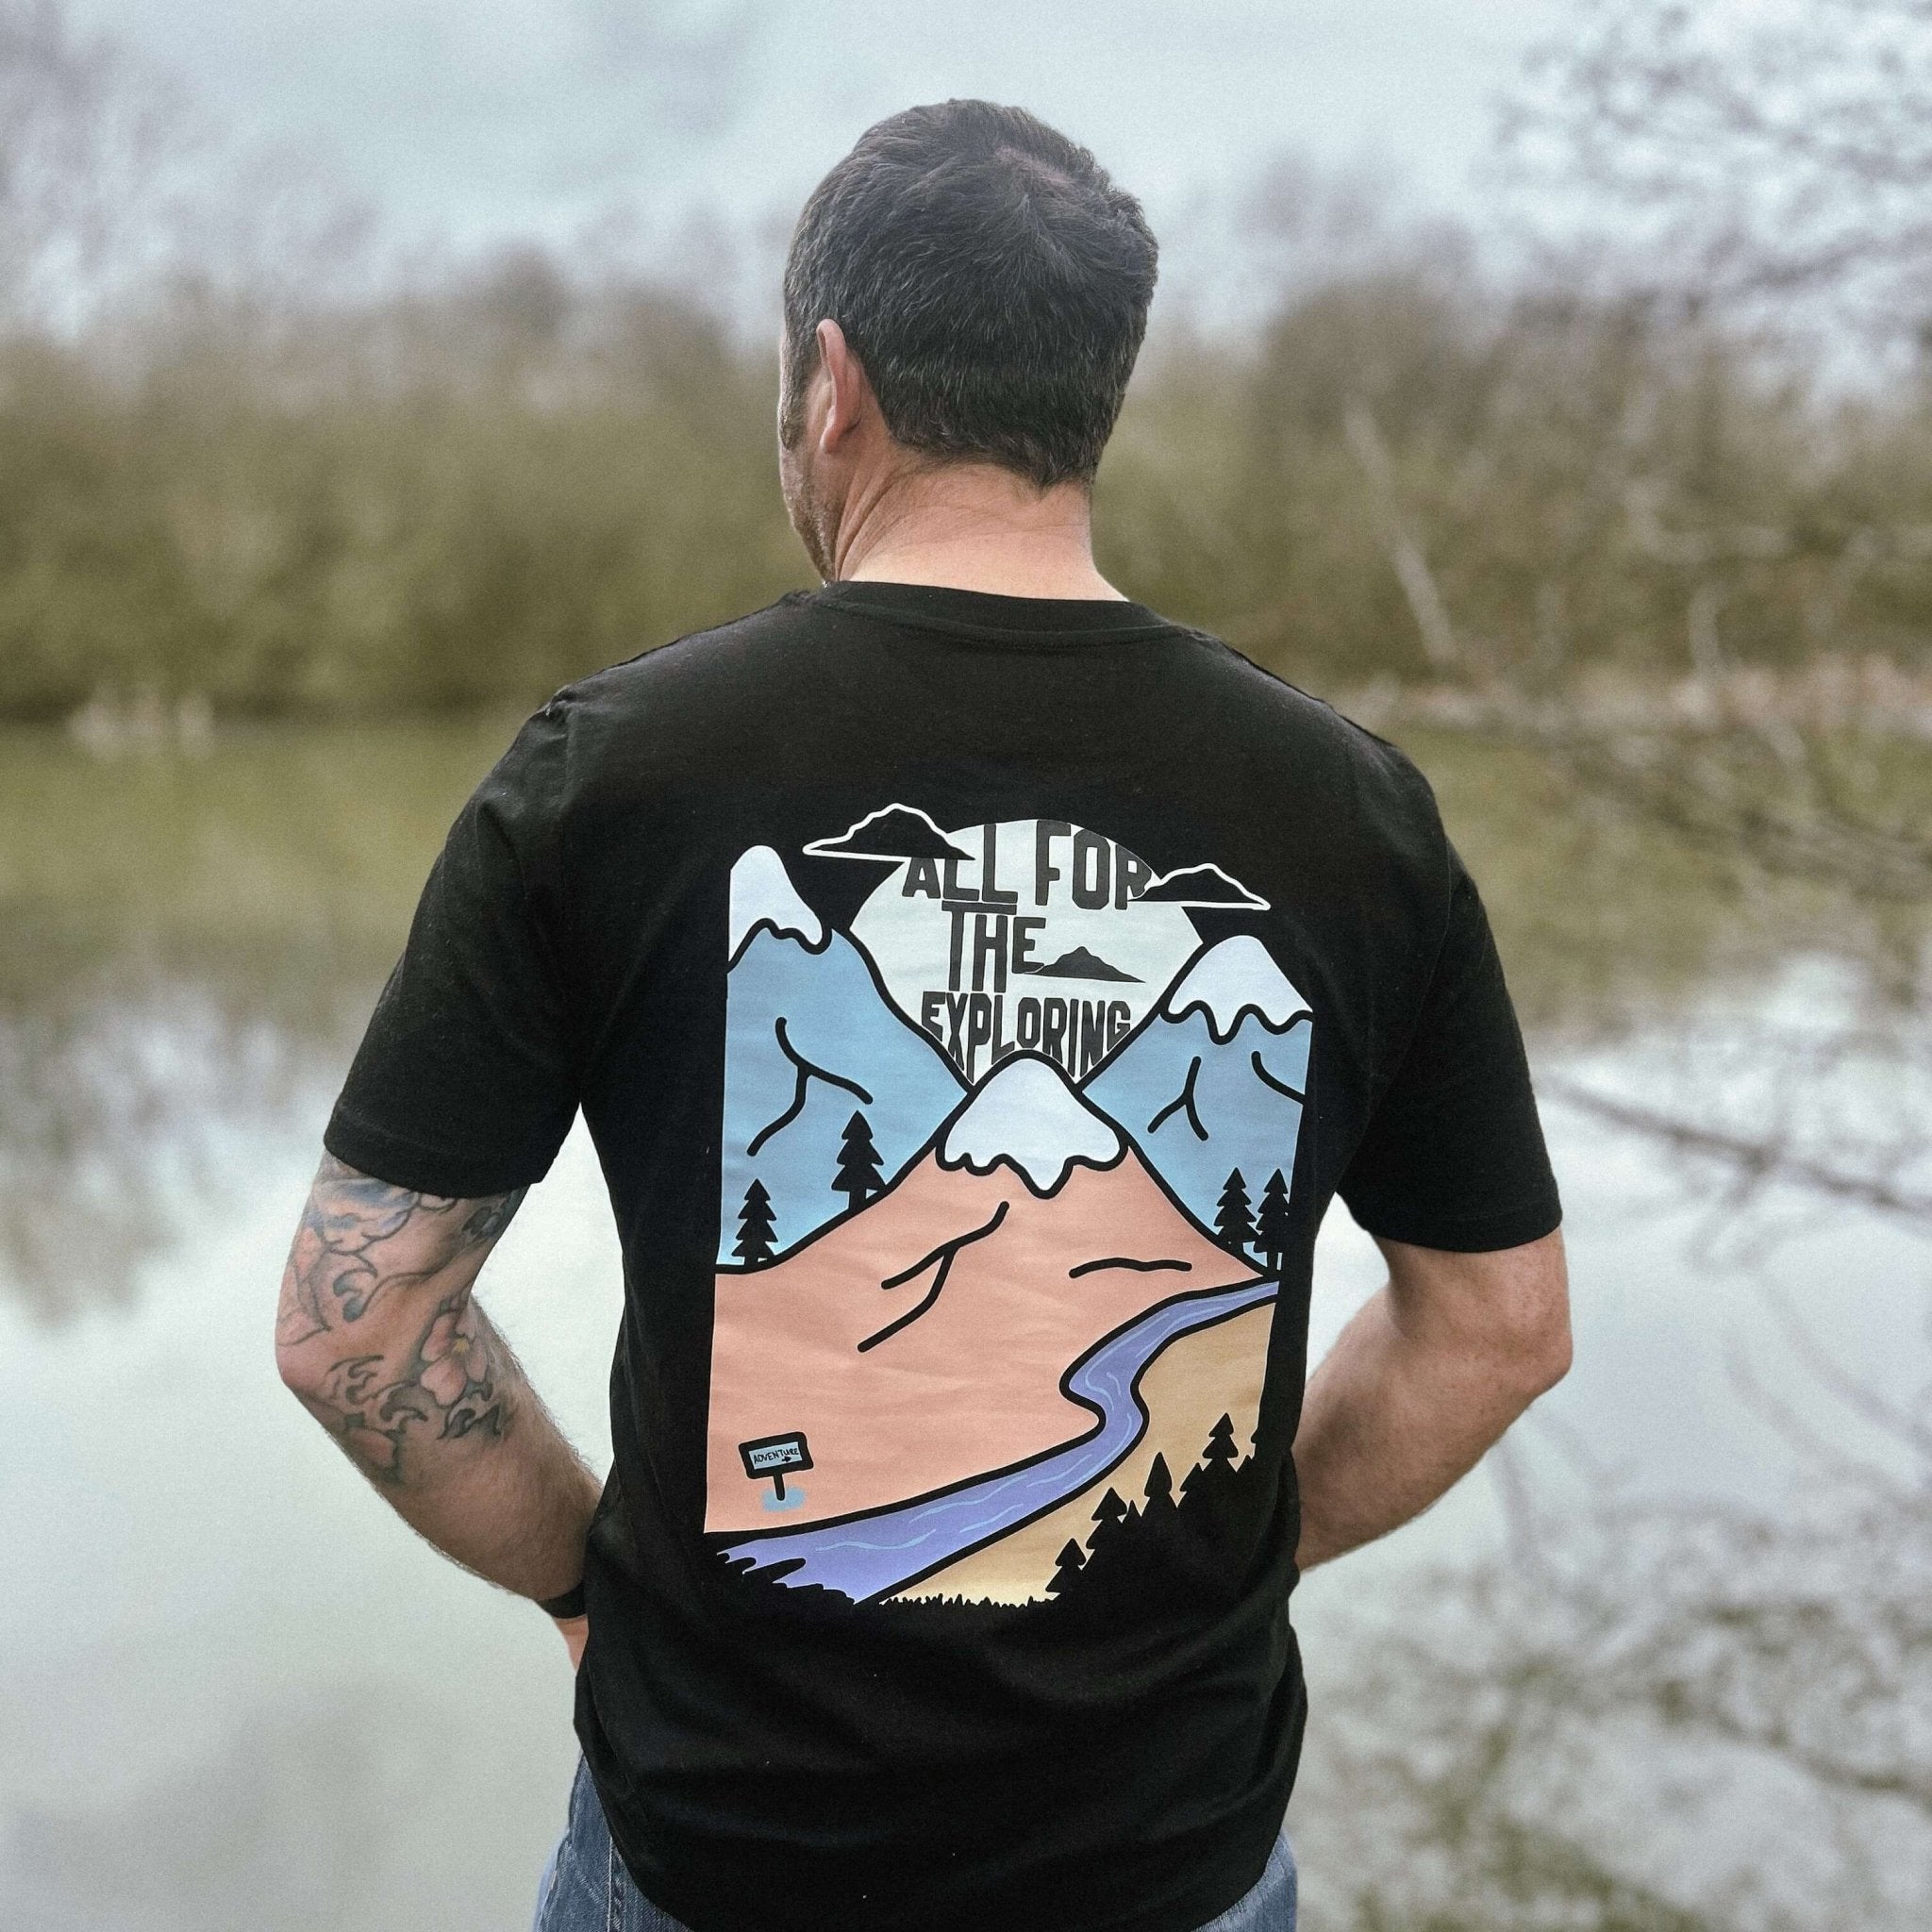 "All For the Exploring" Organic Tee - Lynch & Loose Clothing